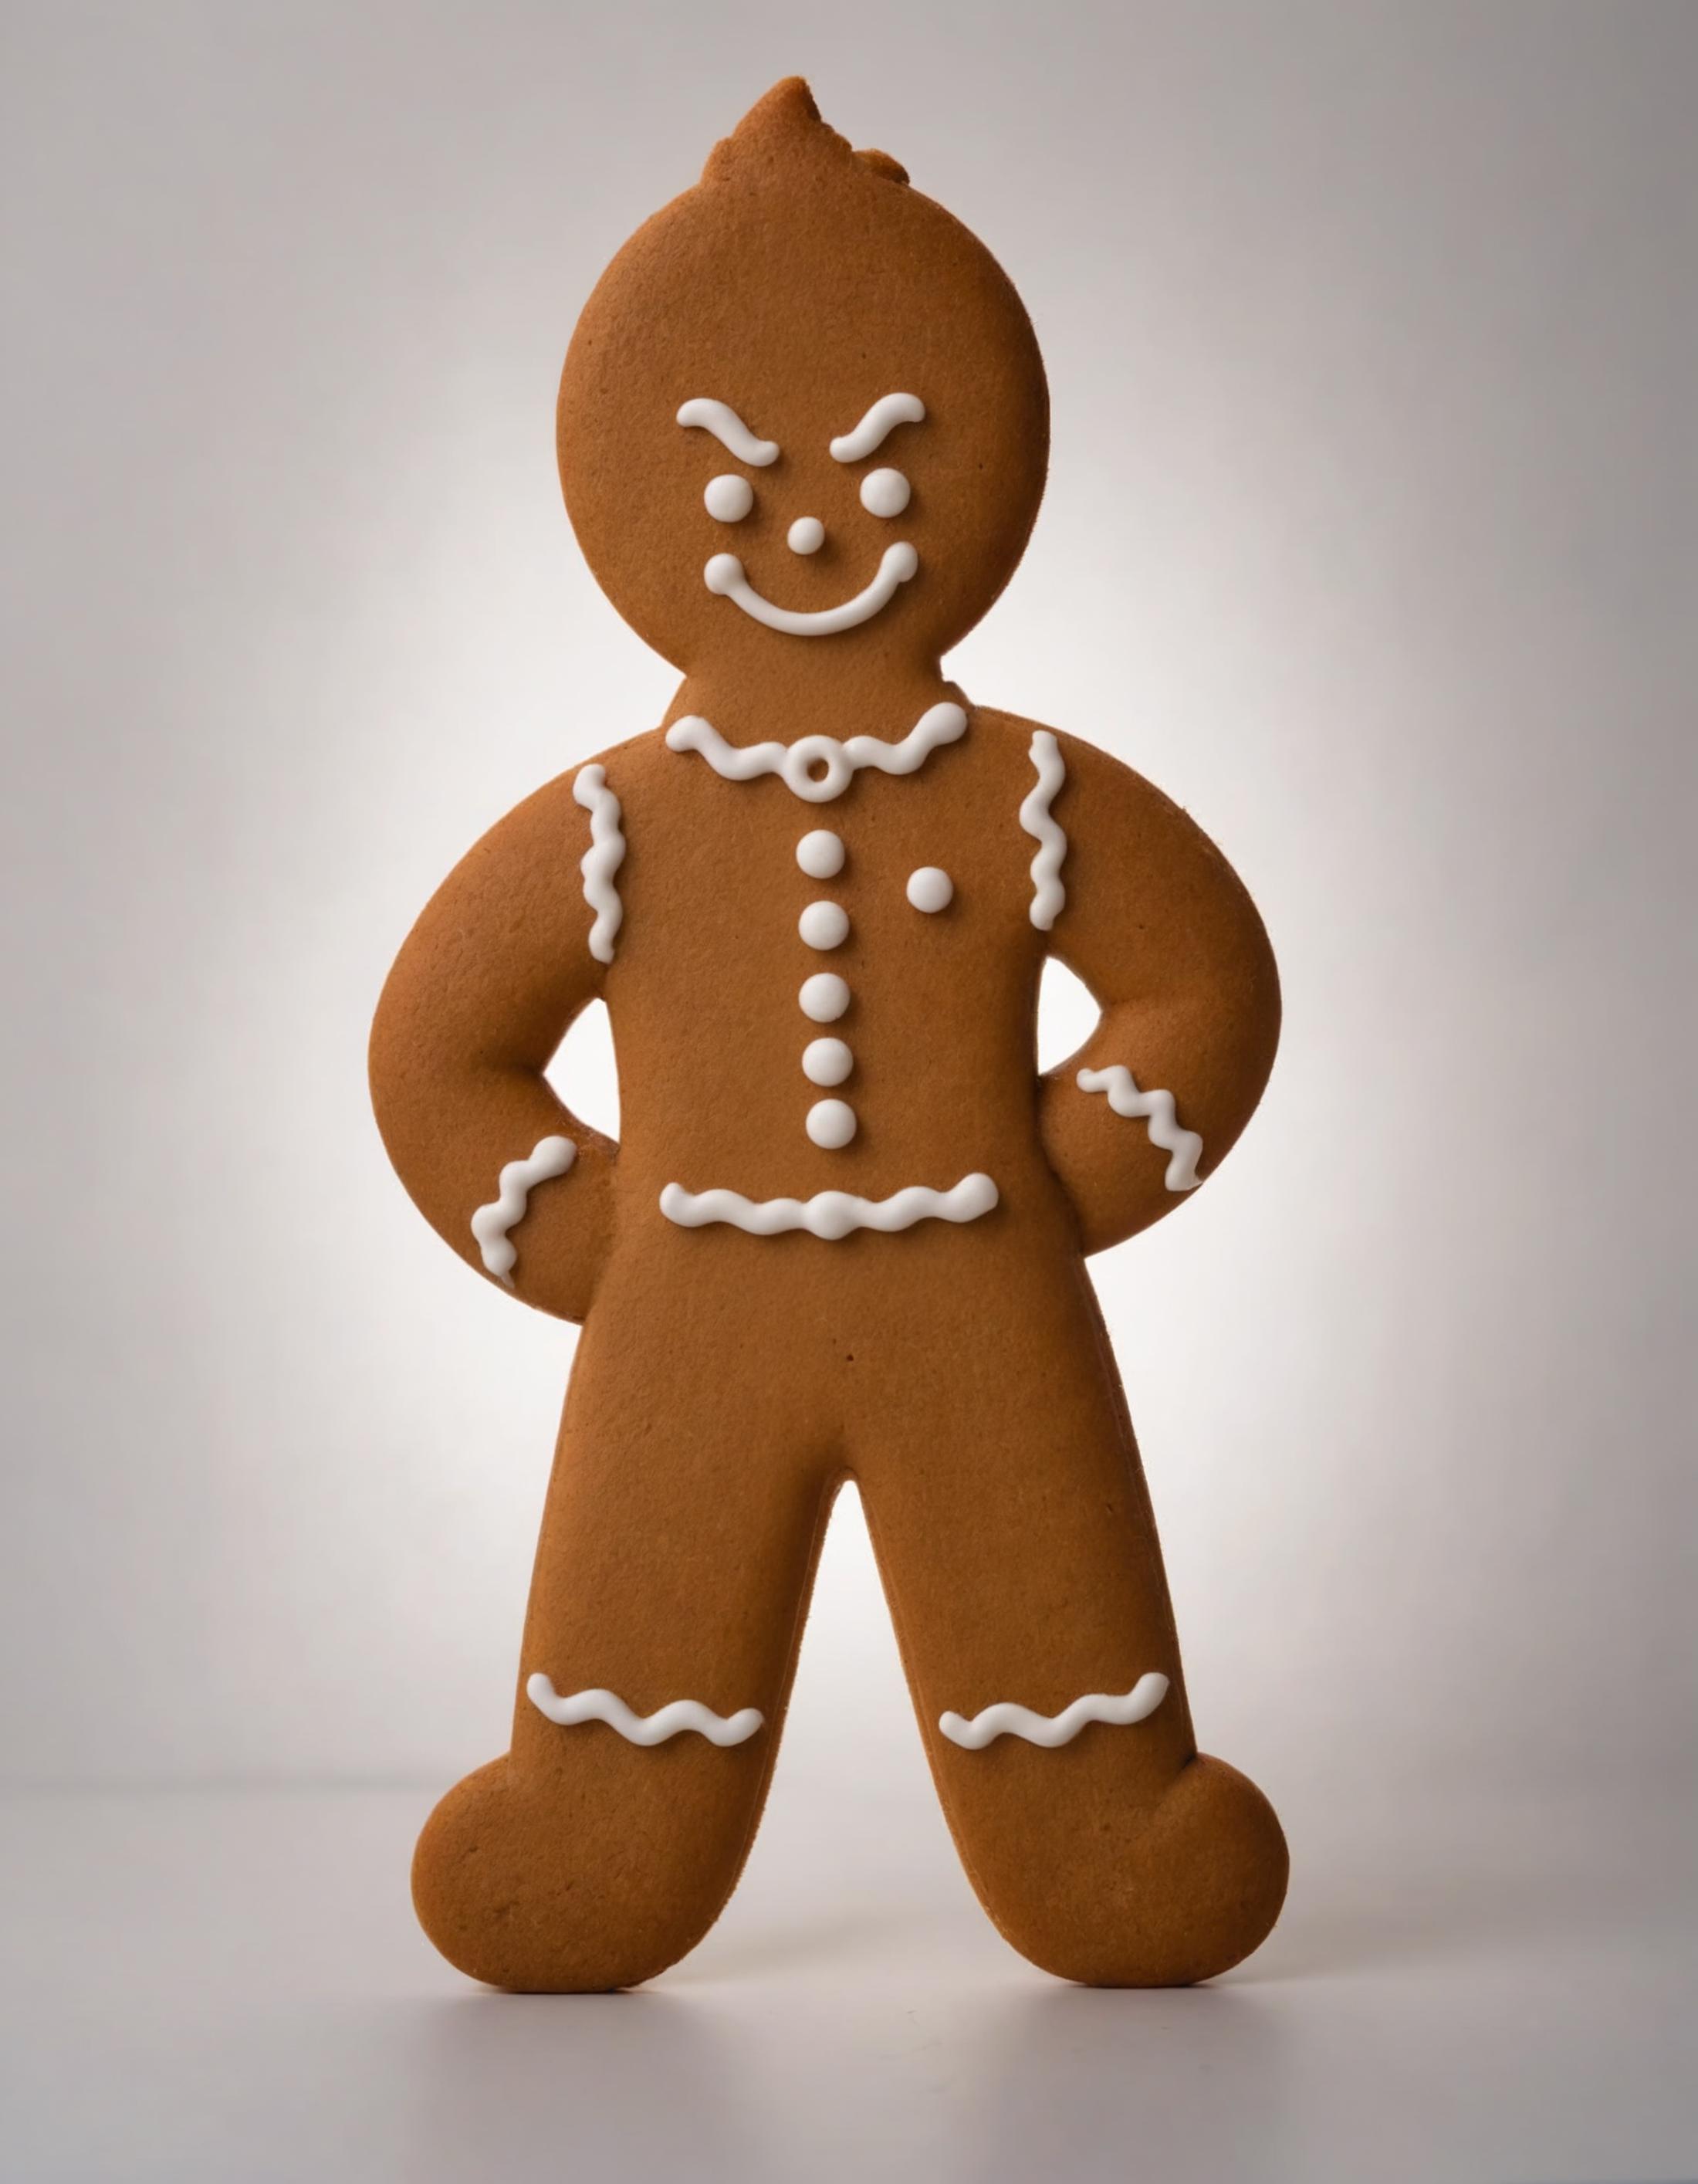 Gingerbread image by humblemikey